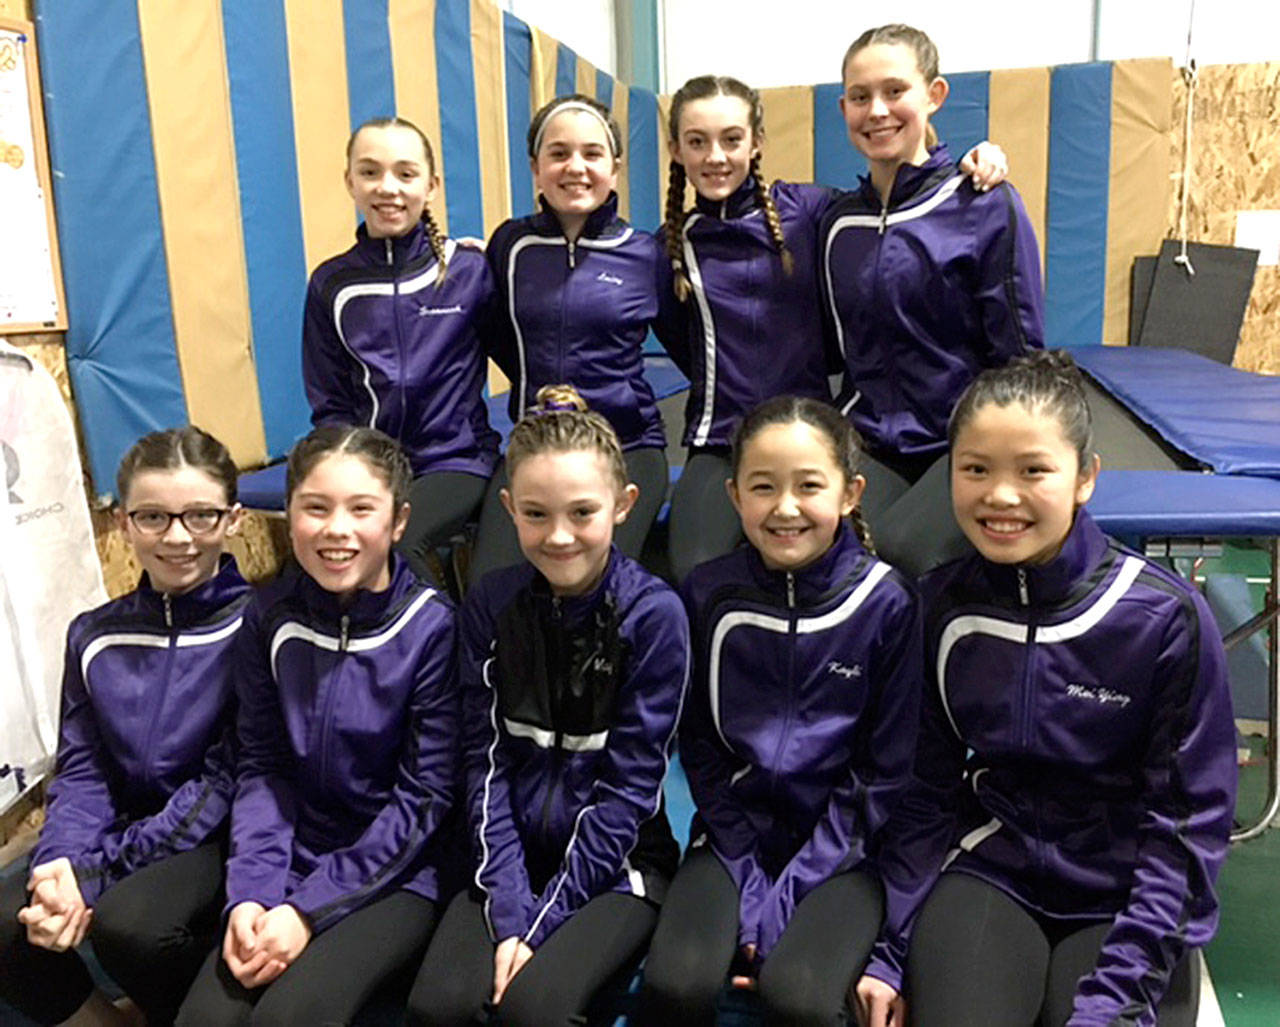 Klahhane Gymnastics gymnasts at the Bunny Hop Invitational in Kent this weekend. From left, back row, are Susannah Sharp, Lainy Vig, Danica Pierson and Anne Edwards. From left, front ropw, are Jessamyn Schindler, Sadie Miller, Rylee Evans, Kayli Sexton and MeiYing Harper-Smith. Not in the picture are team members Cassii Middlestead and Emma Sharp